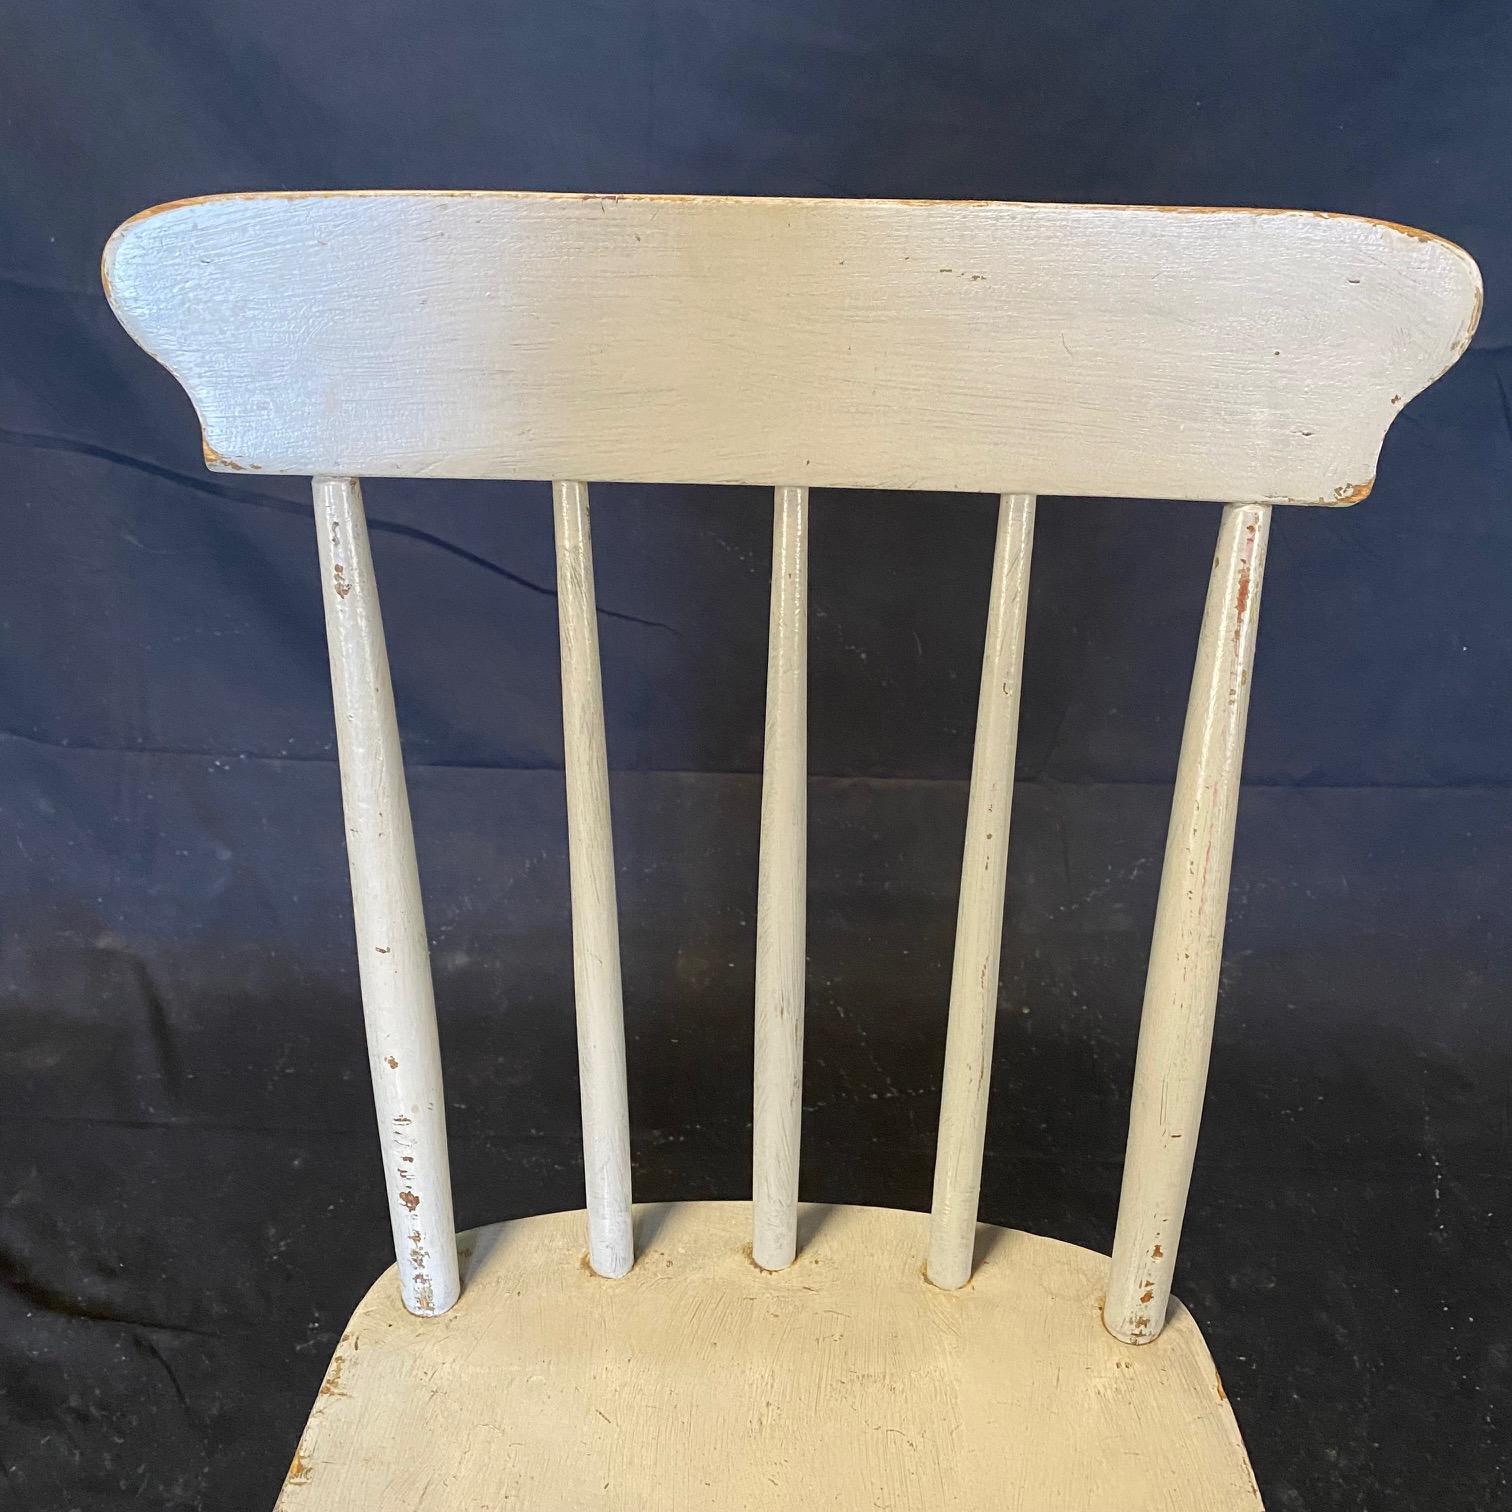  Set of Twelve 19th Century Painted Plank Seat Grange Chairs from Maine 1